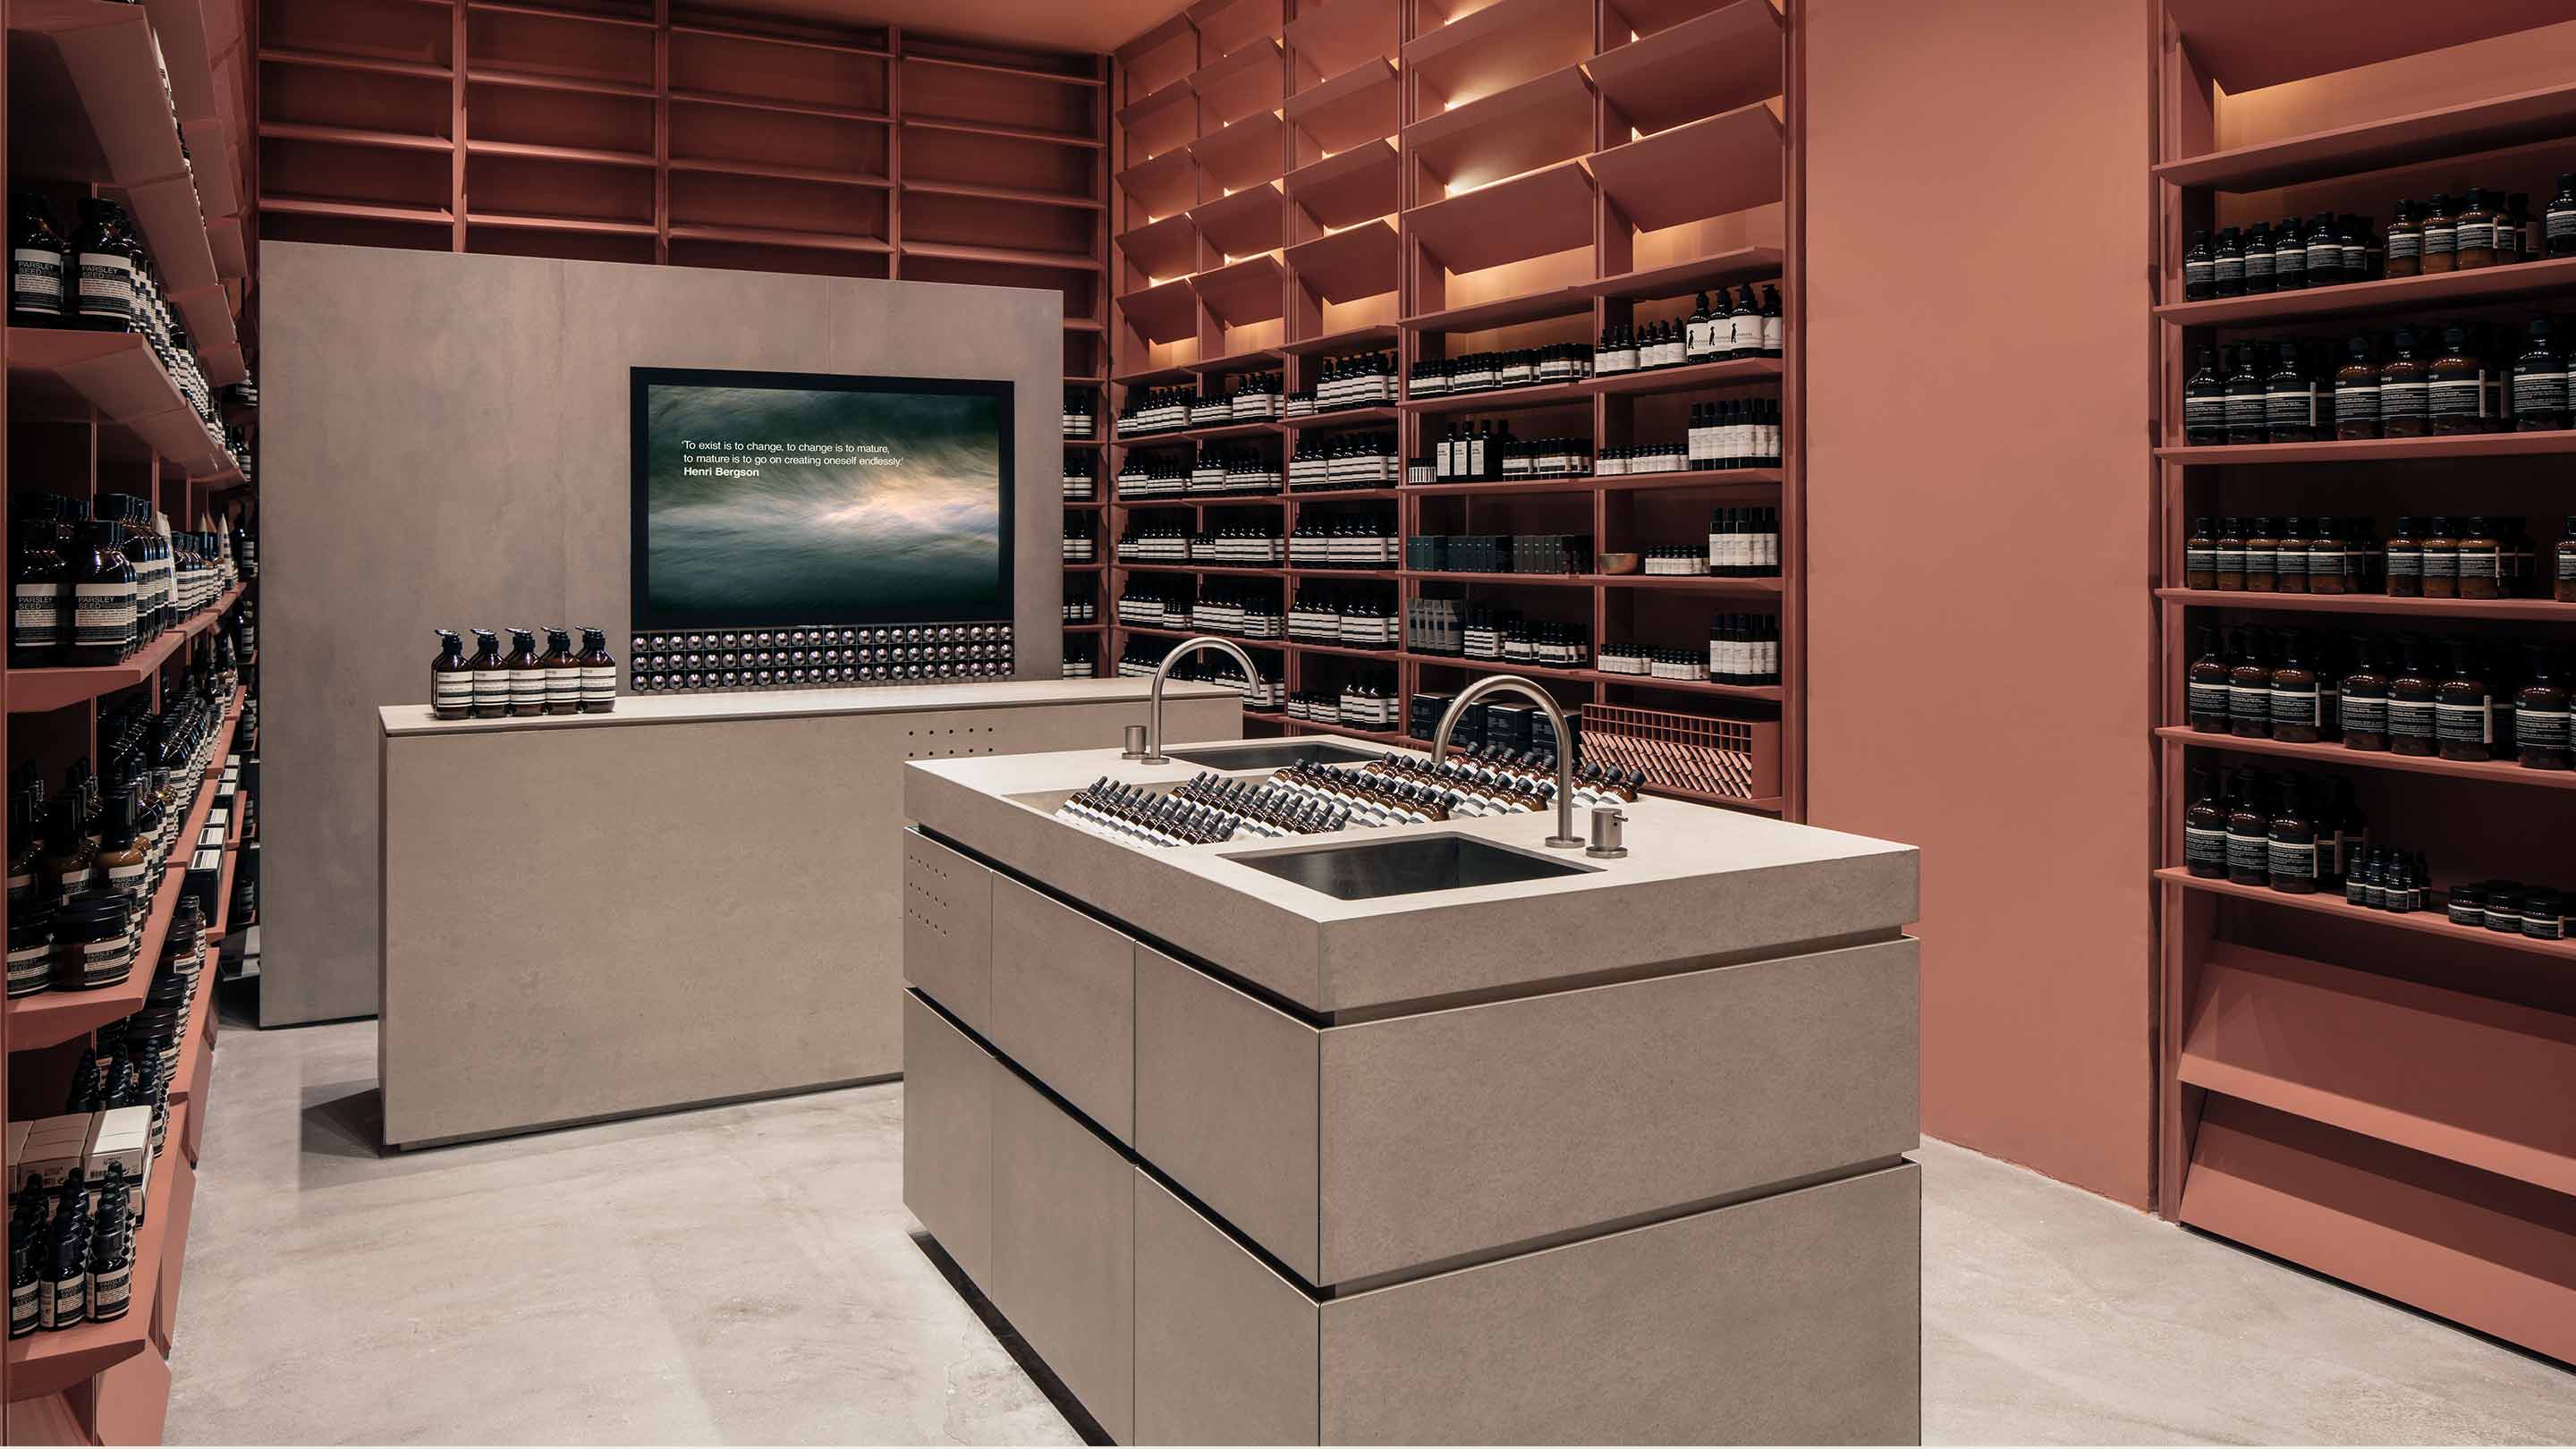 The interior of the store is crafted from brushed concrete floors and counters, surrounded by blush copper tones.